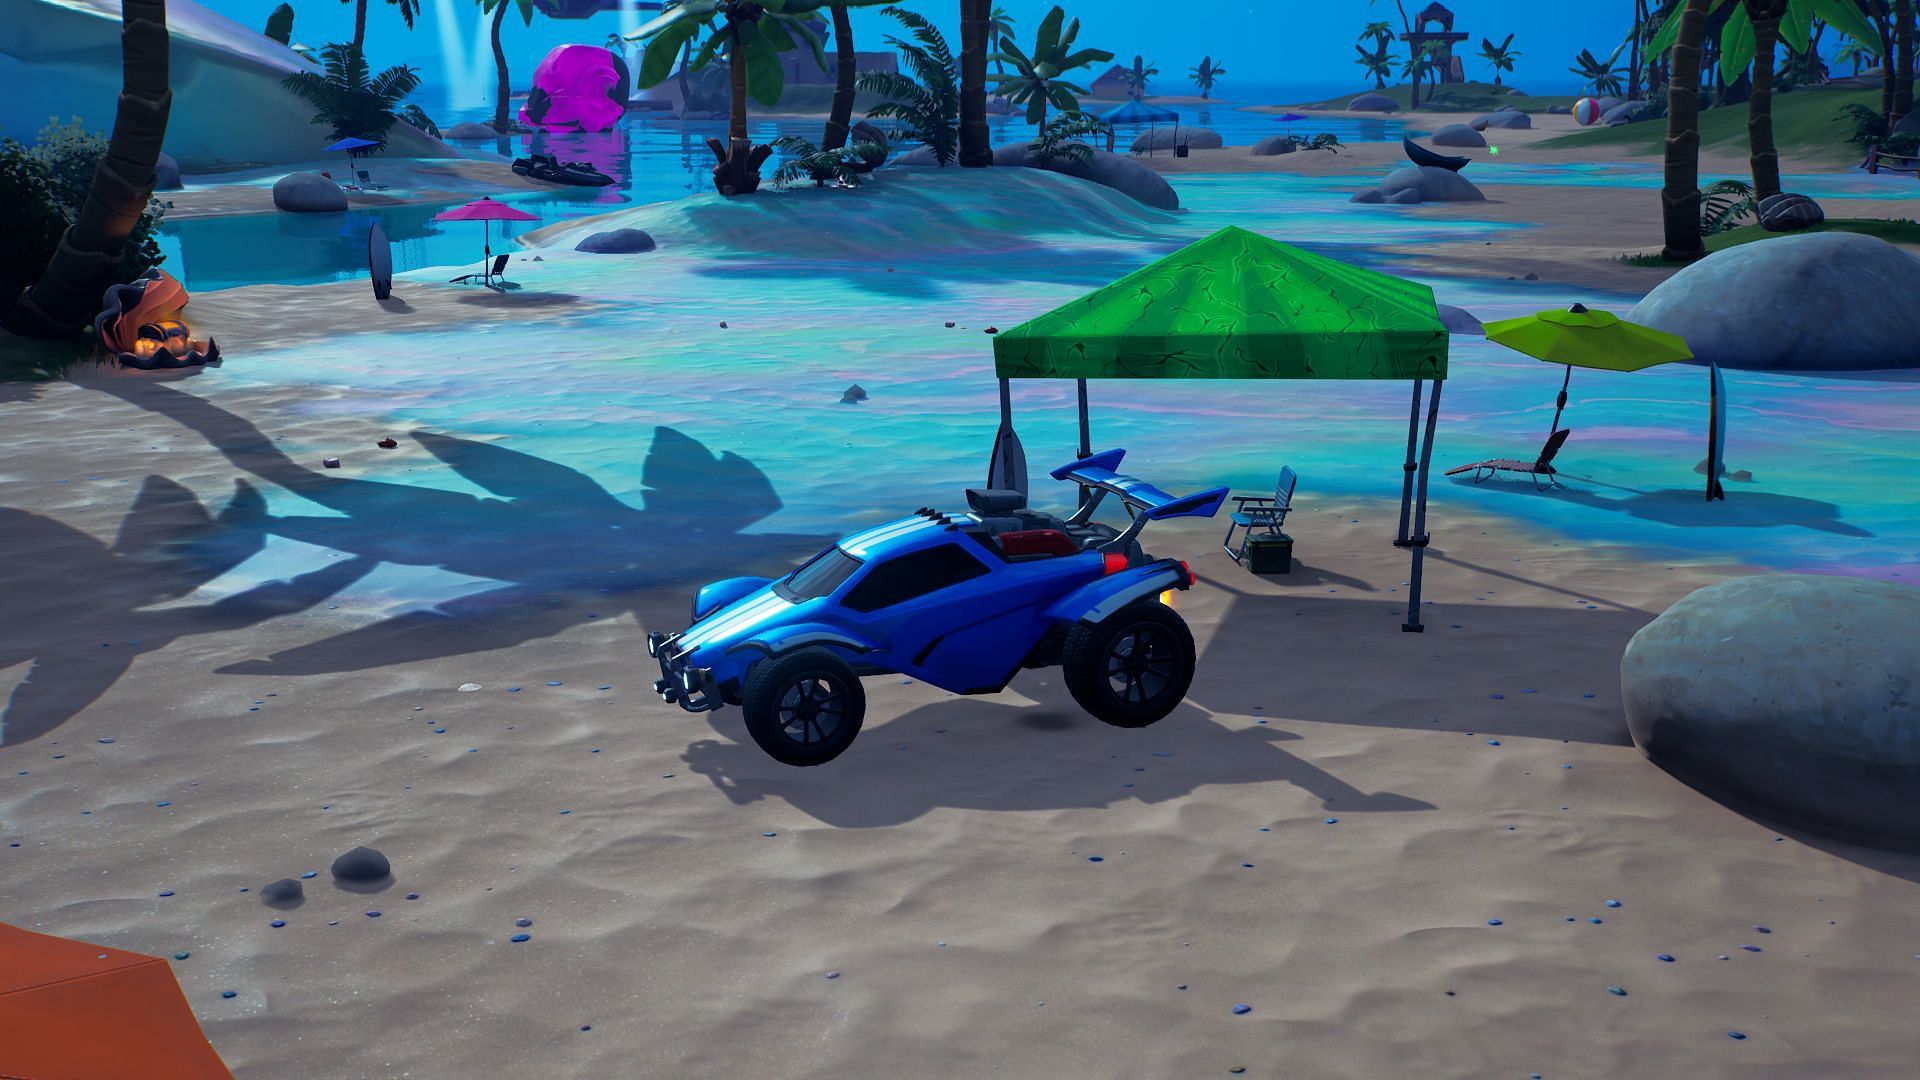 Grab an Octane and prepare to burn some rubber! (Image via Epic Games/Fortnite)